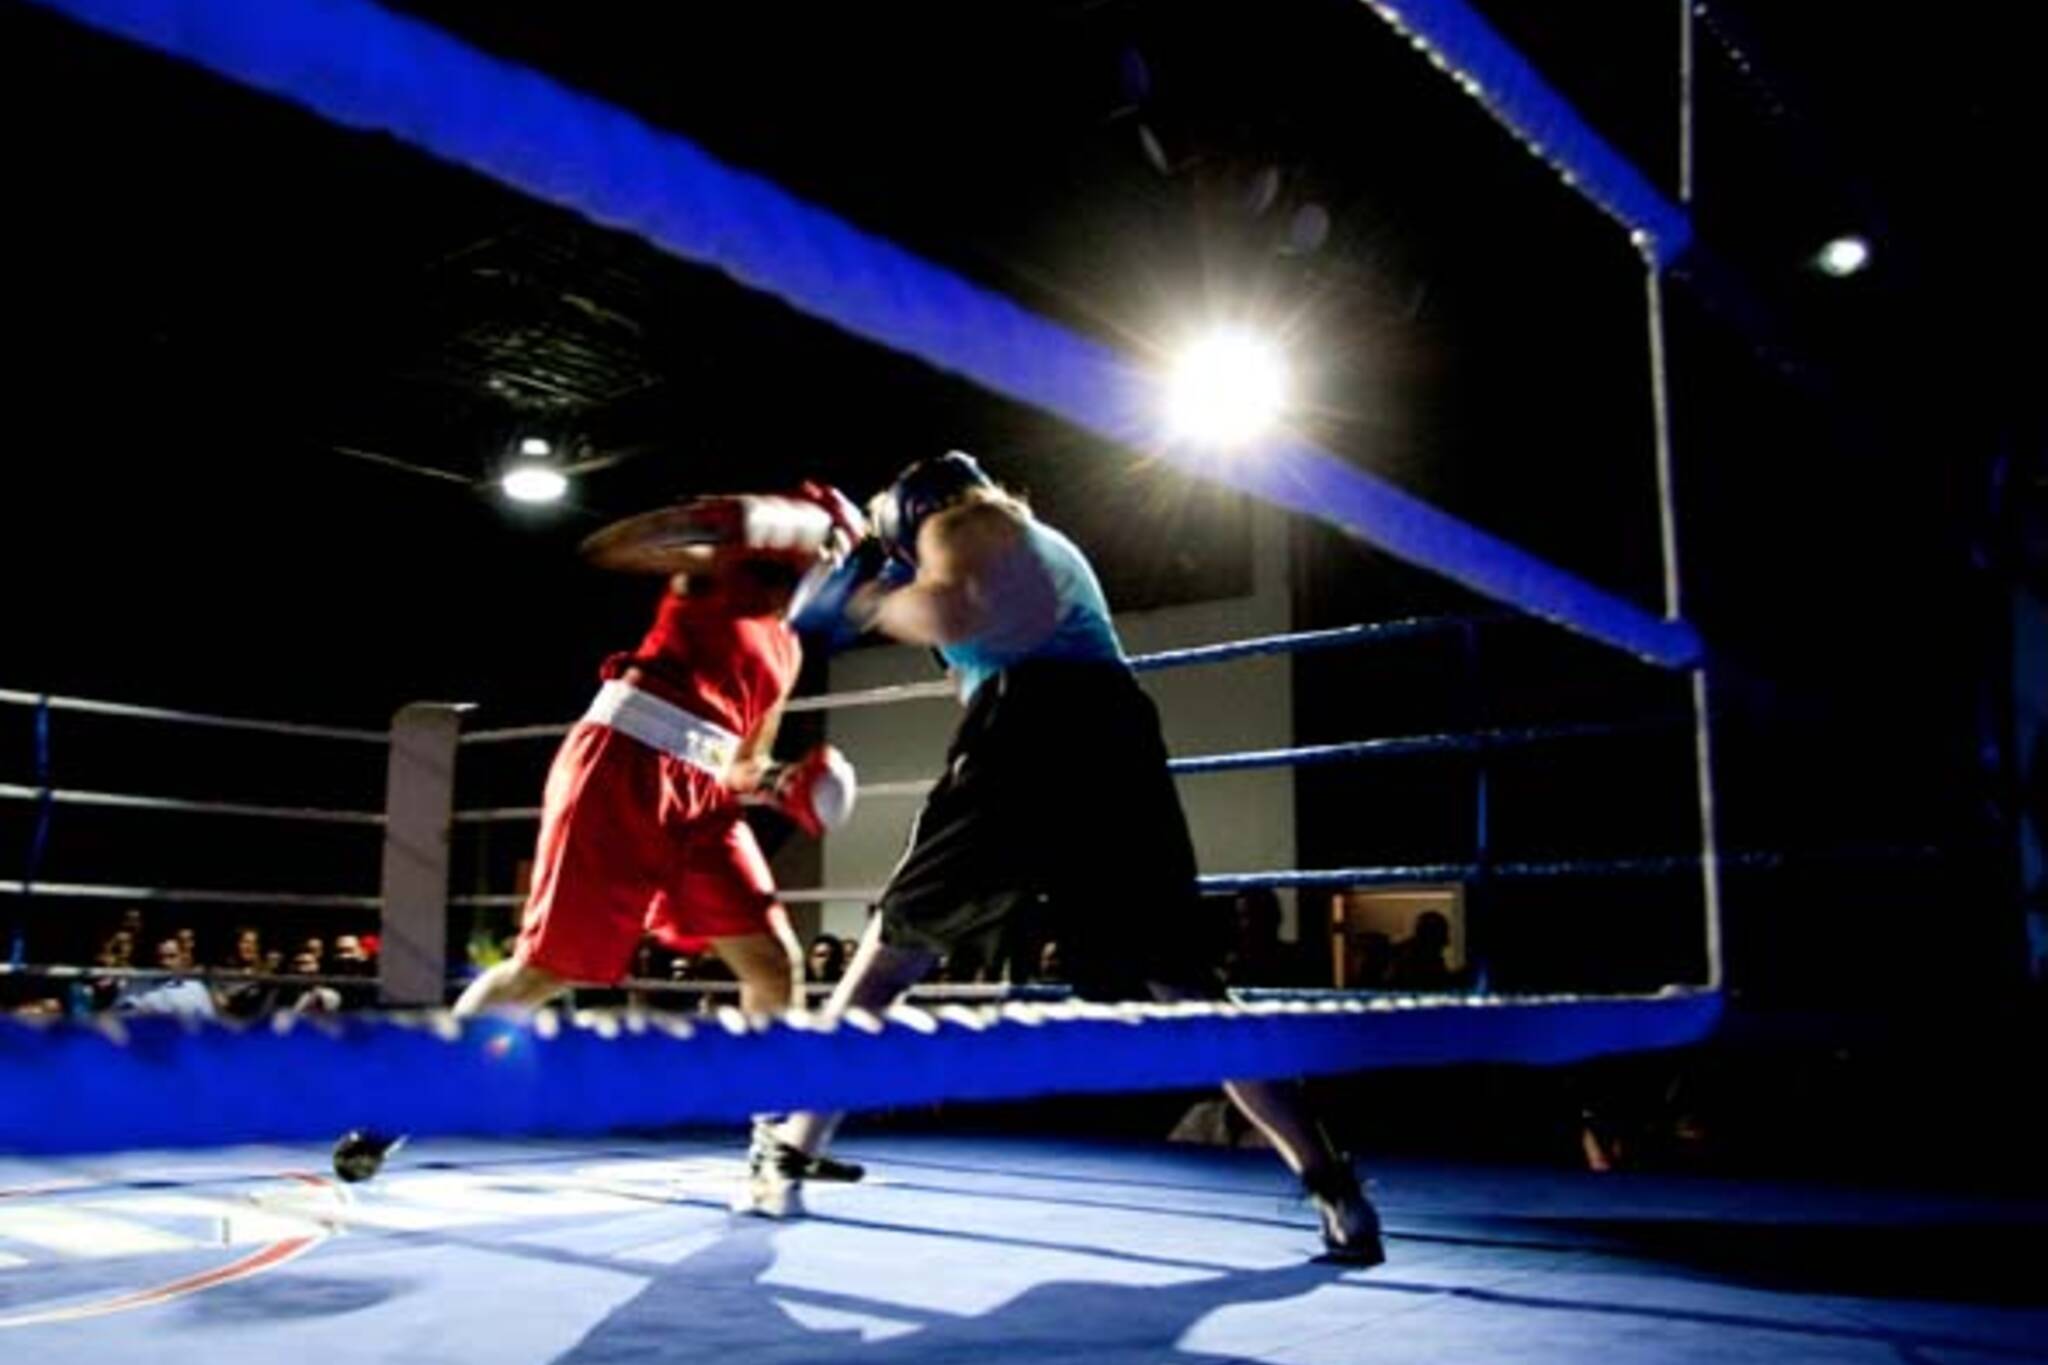 Girls fight for a cause at Toronto boxing event